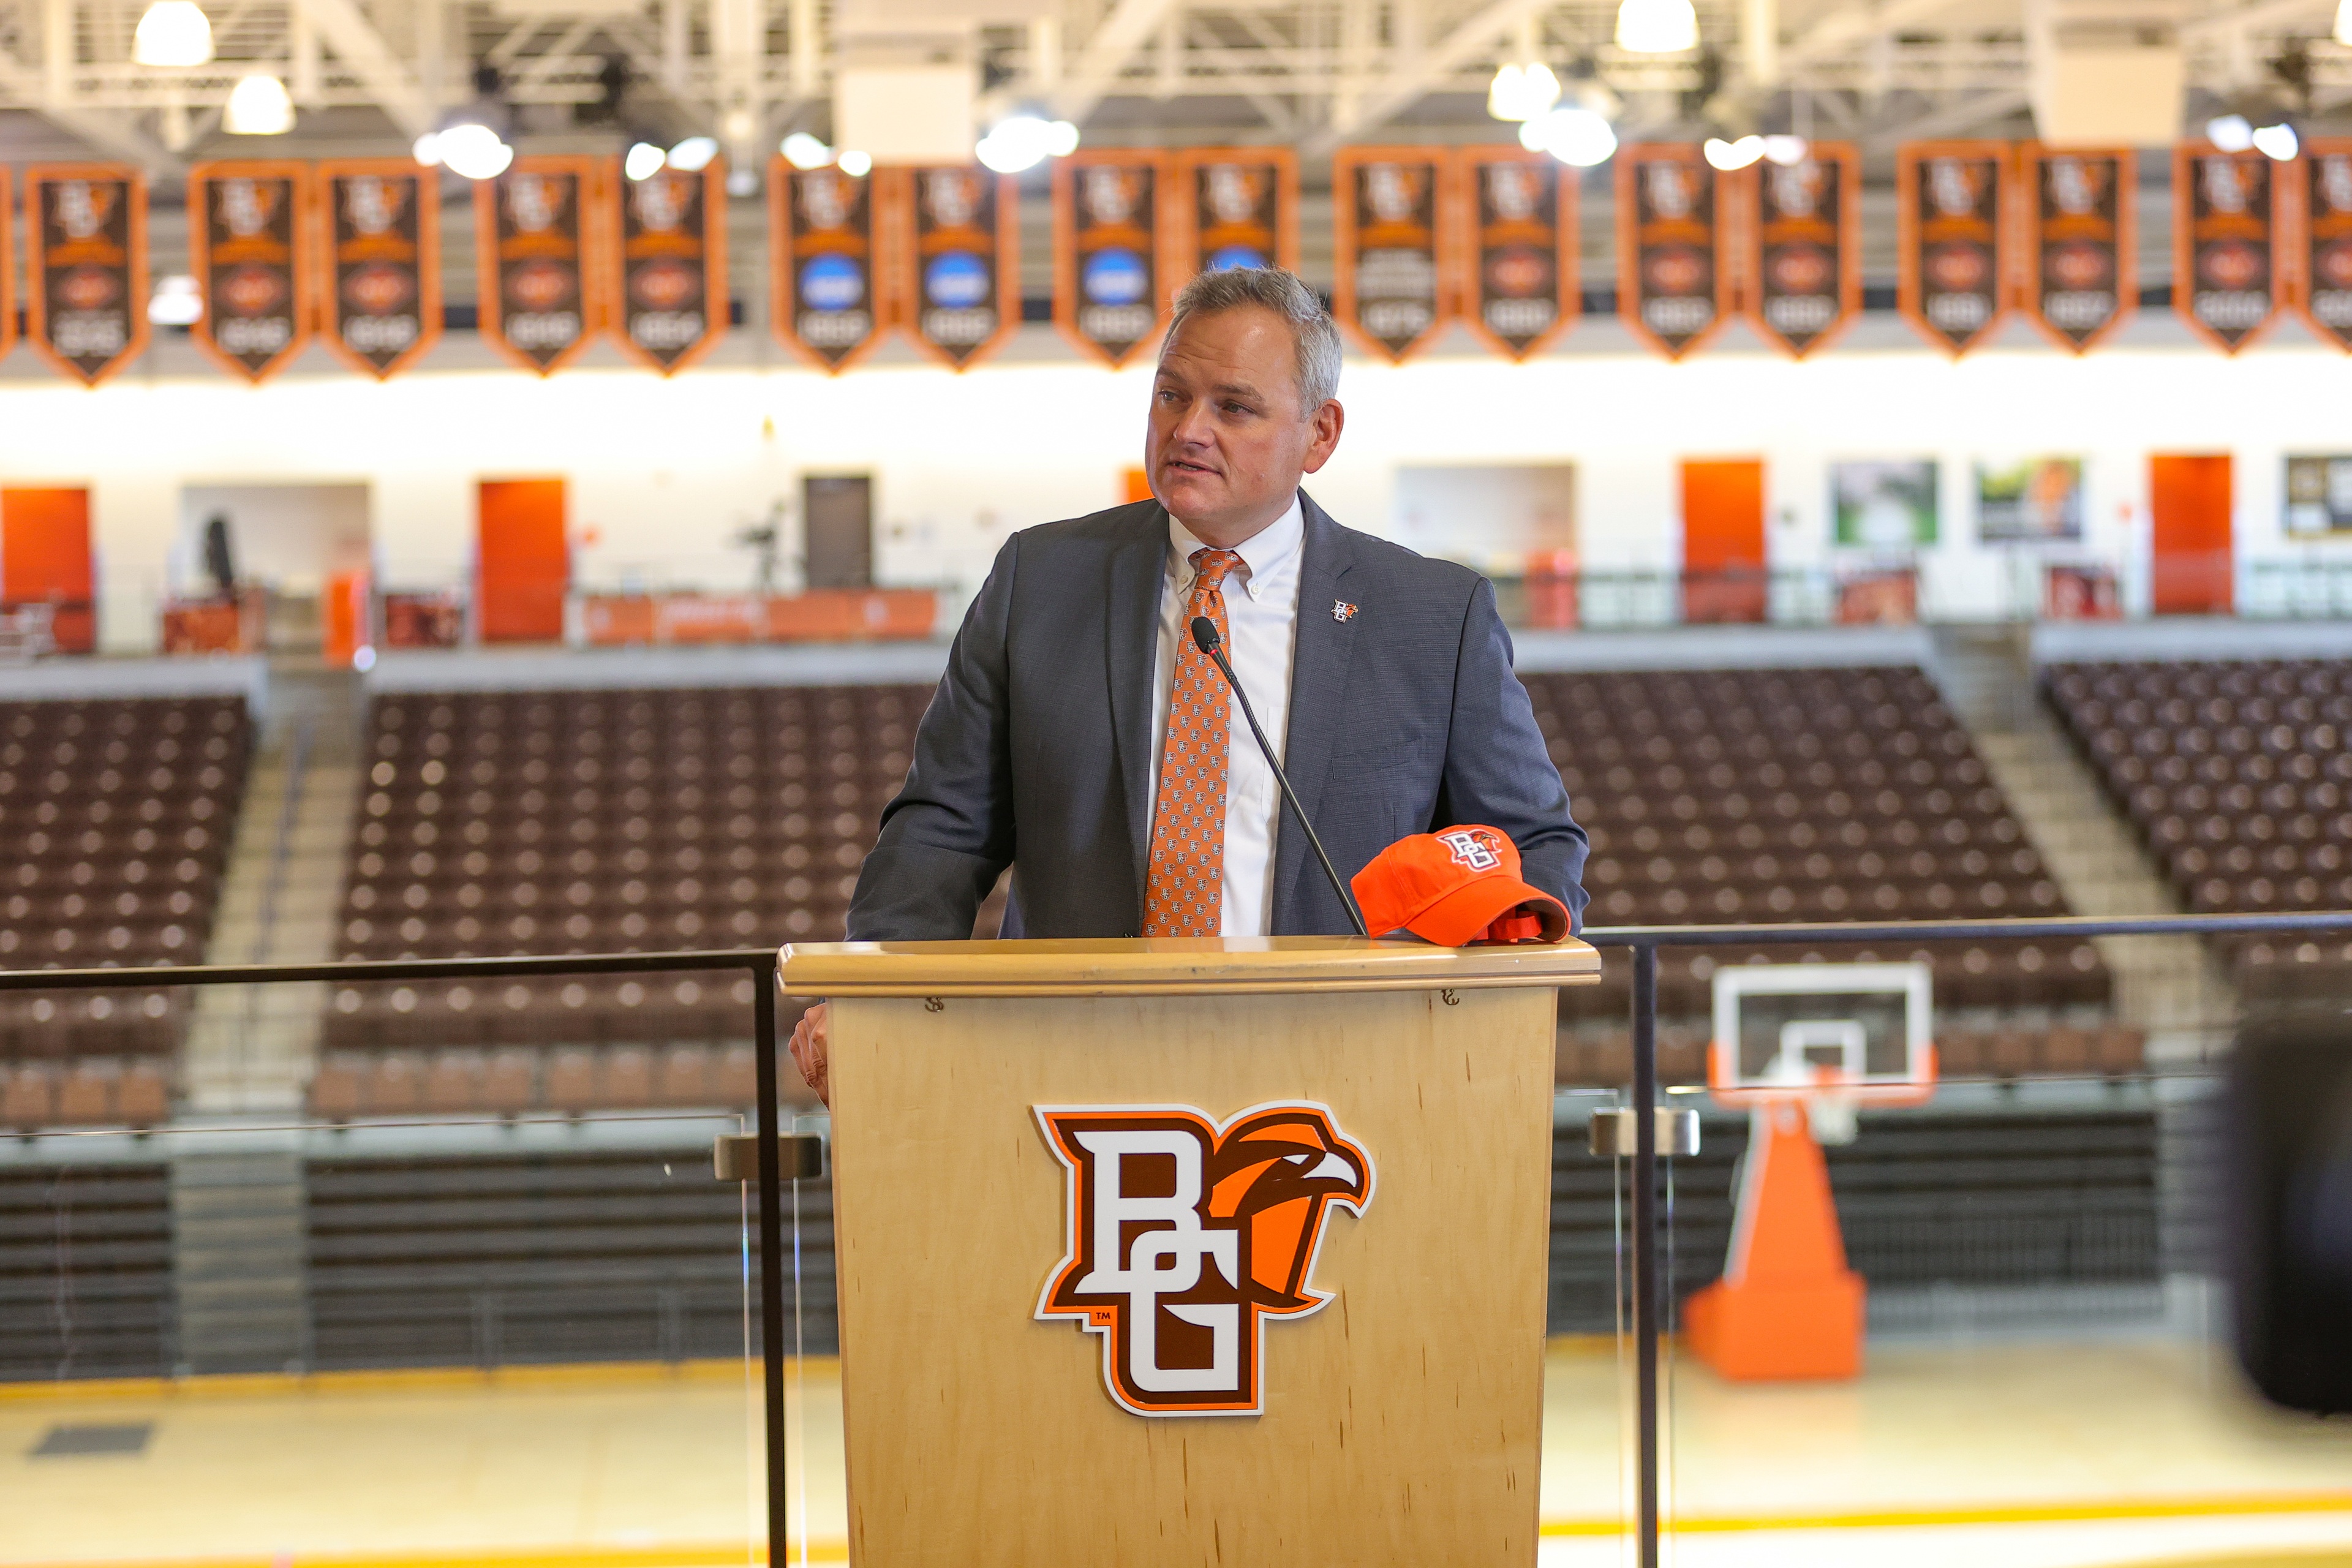 Derek van der Merwe will serve as the 15th director of athletics at BGSU and comes from the University of Arizona Athletics, where he worked since 2018.